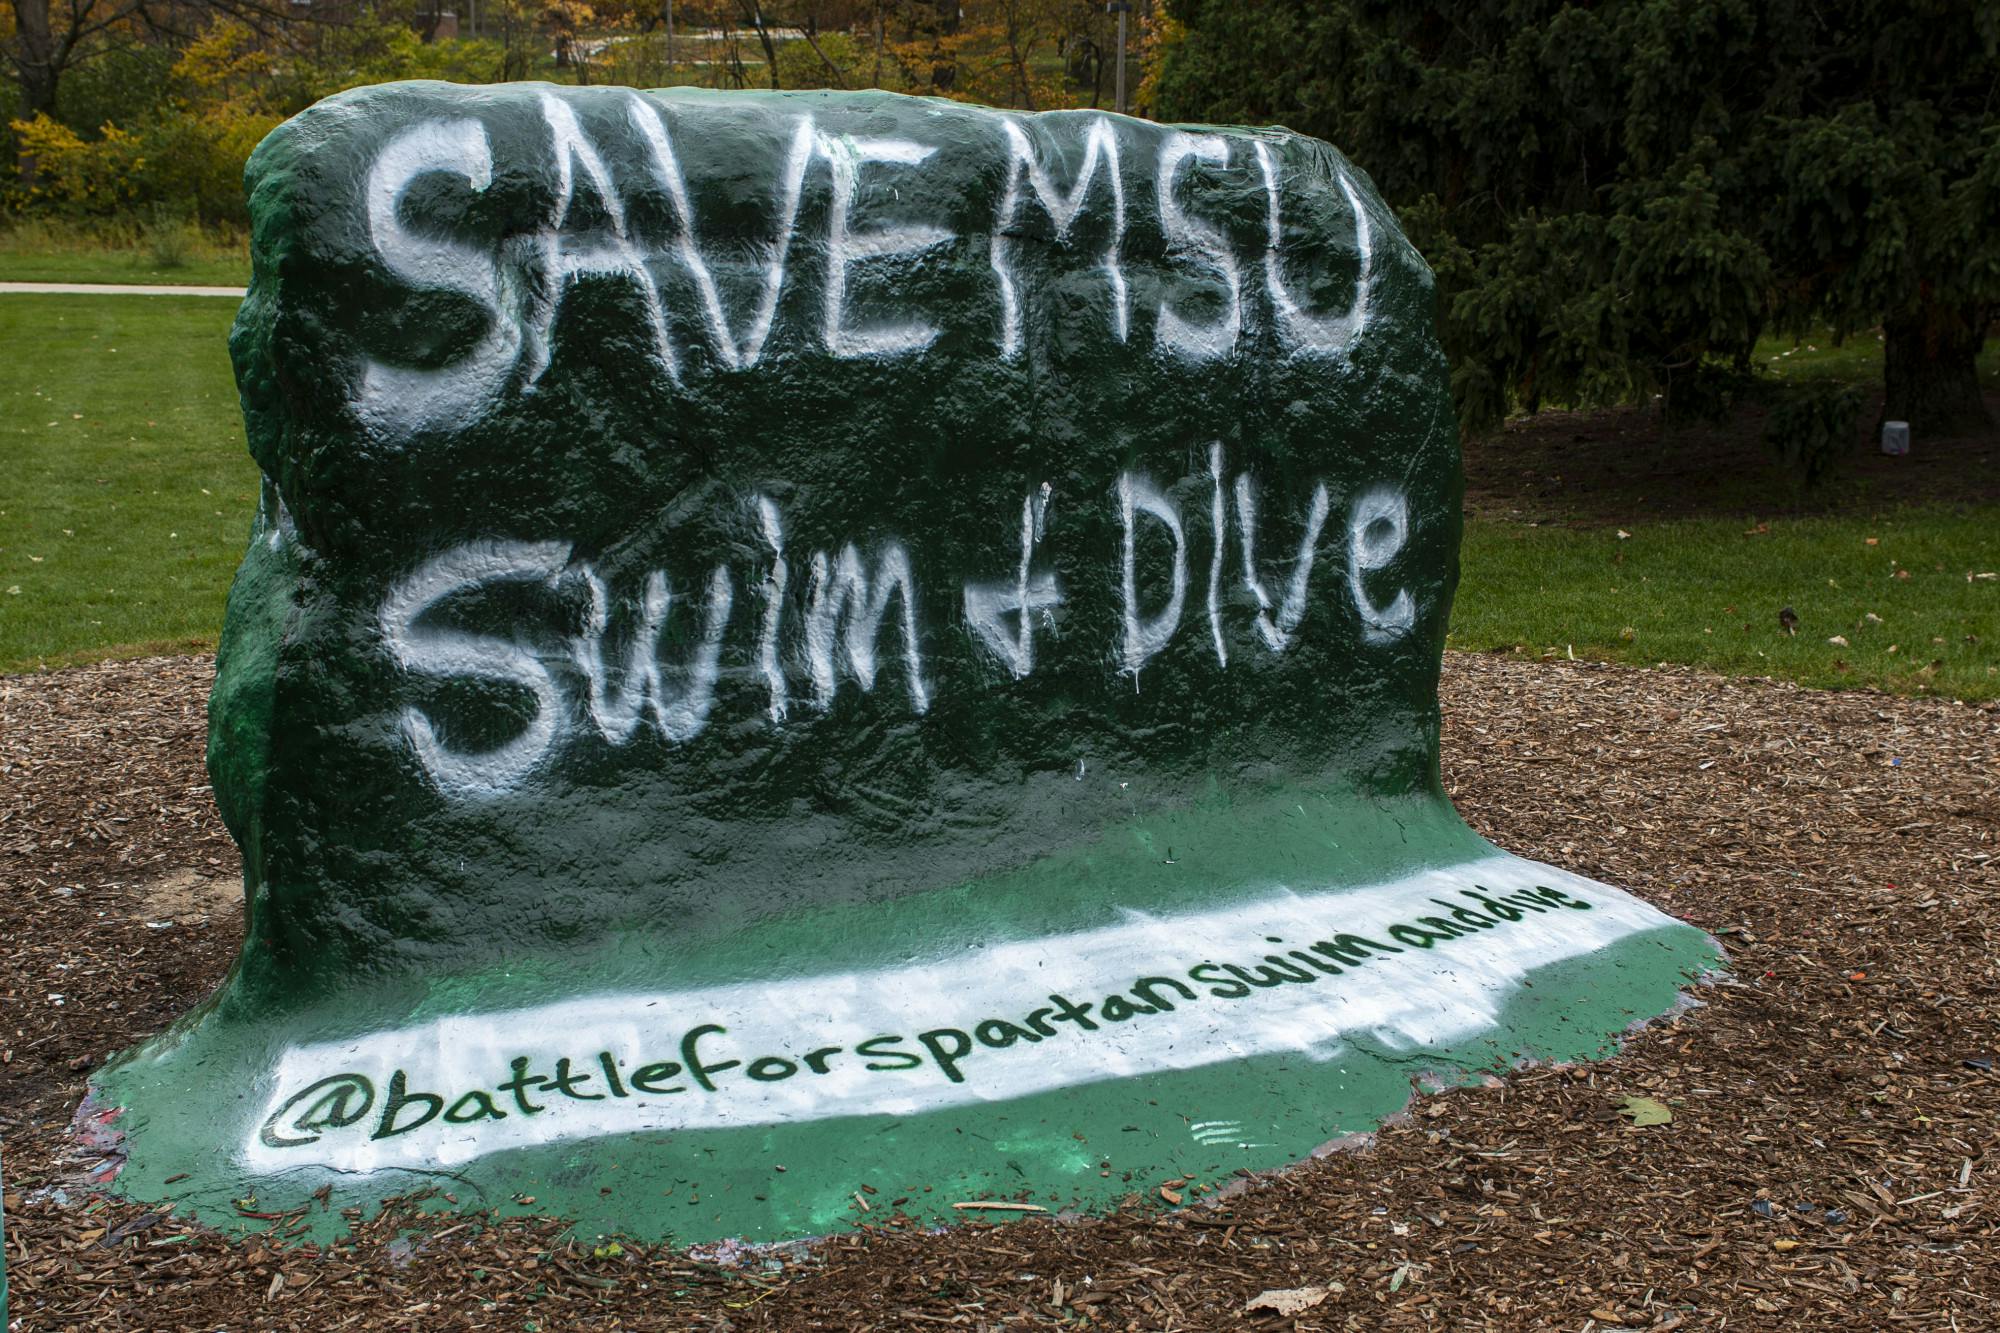 The Rock, located on Farm Lane, is painted to show support against cutting the MSU Swim & Dive program. The university declared Thursday they would stop funding the program after the 2020-21 school year is over. Shot on Oct. 26, 2020. 